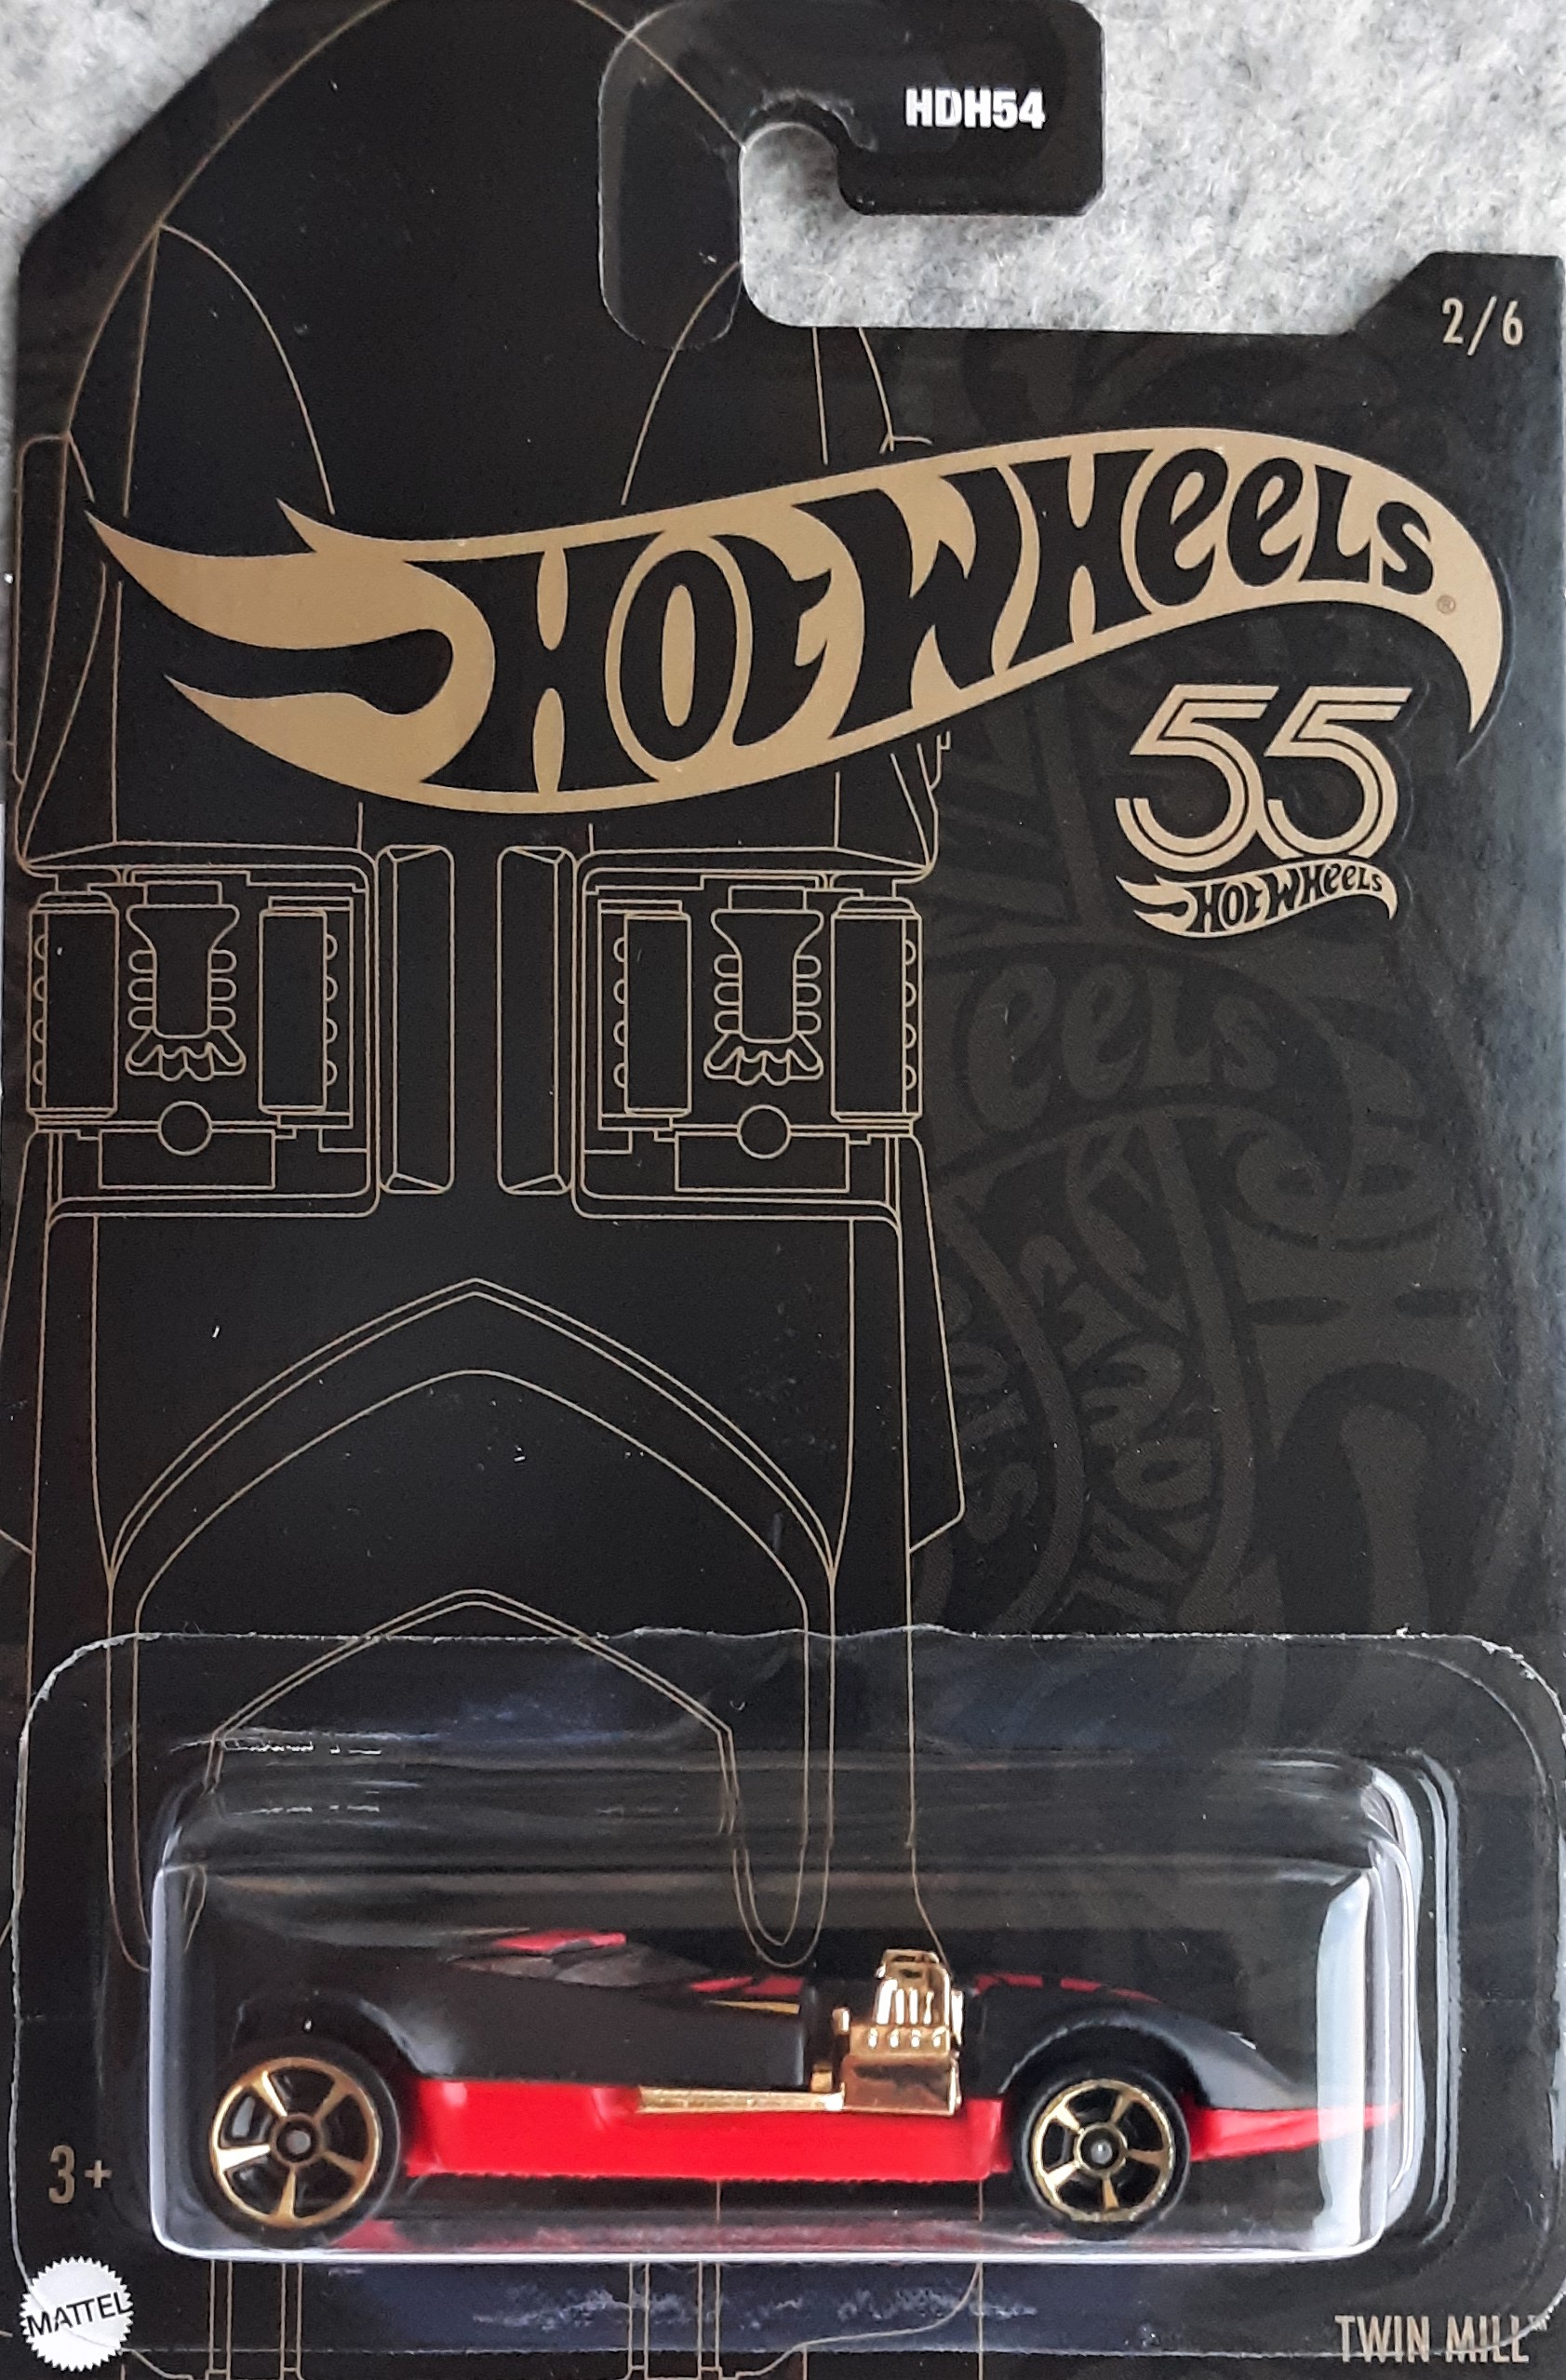 Hot Wheels 55th Anniversary Series 2/6 - '92 BMW M3 (Exclusive) 